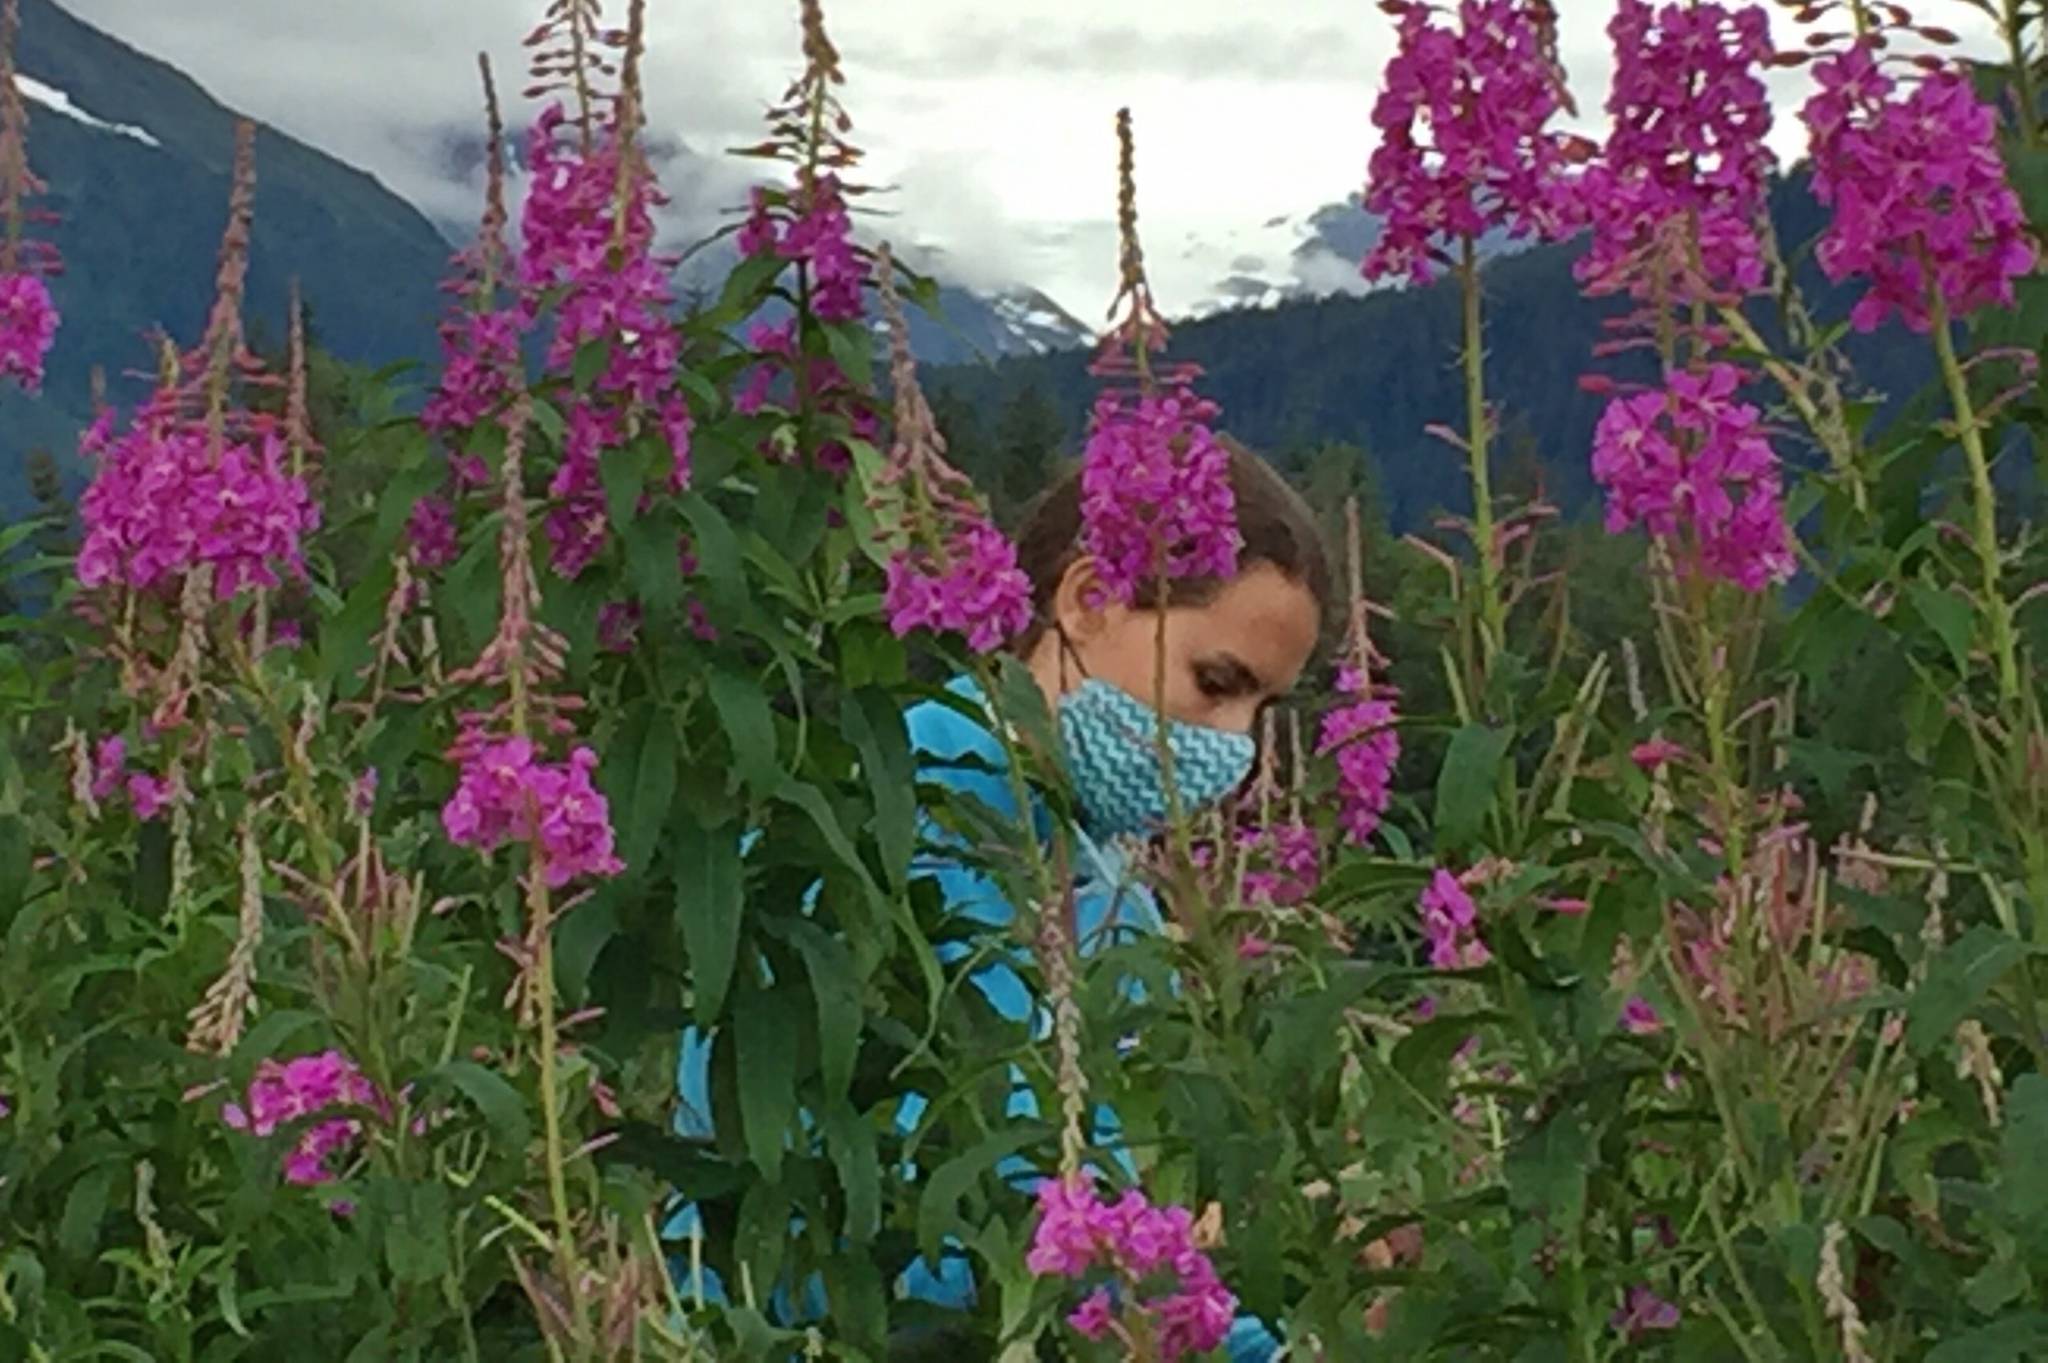 Maleah Wenzel, physical distance harvests fireweed with Vivian Mork. (Vivian Mork Yéilk’ / For the Capital City Weekly)